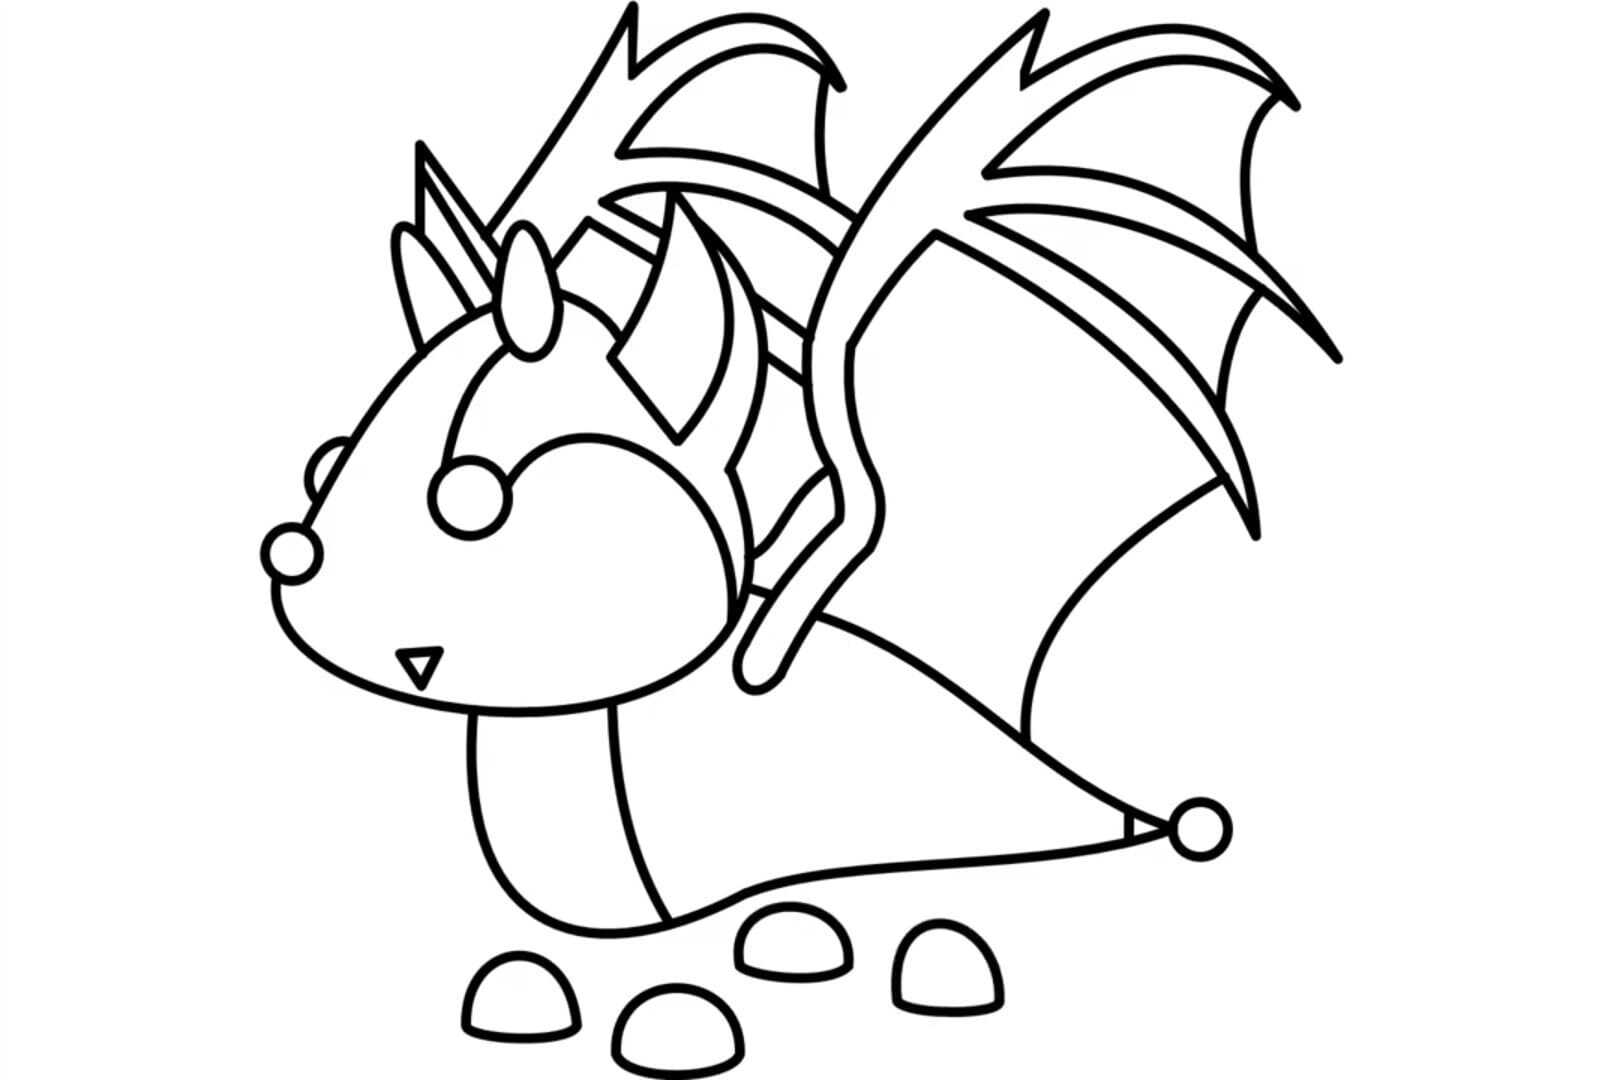 Bat dragon from Halloween event in Adopt me Coloring Pages   Adopt ...